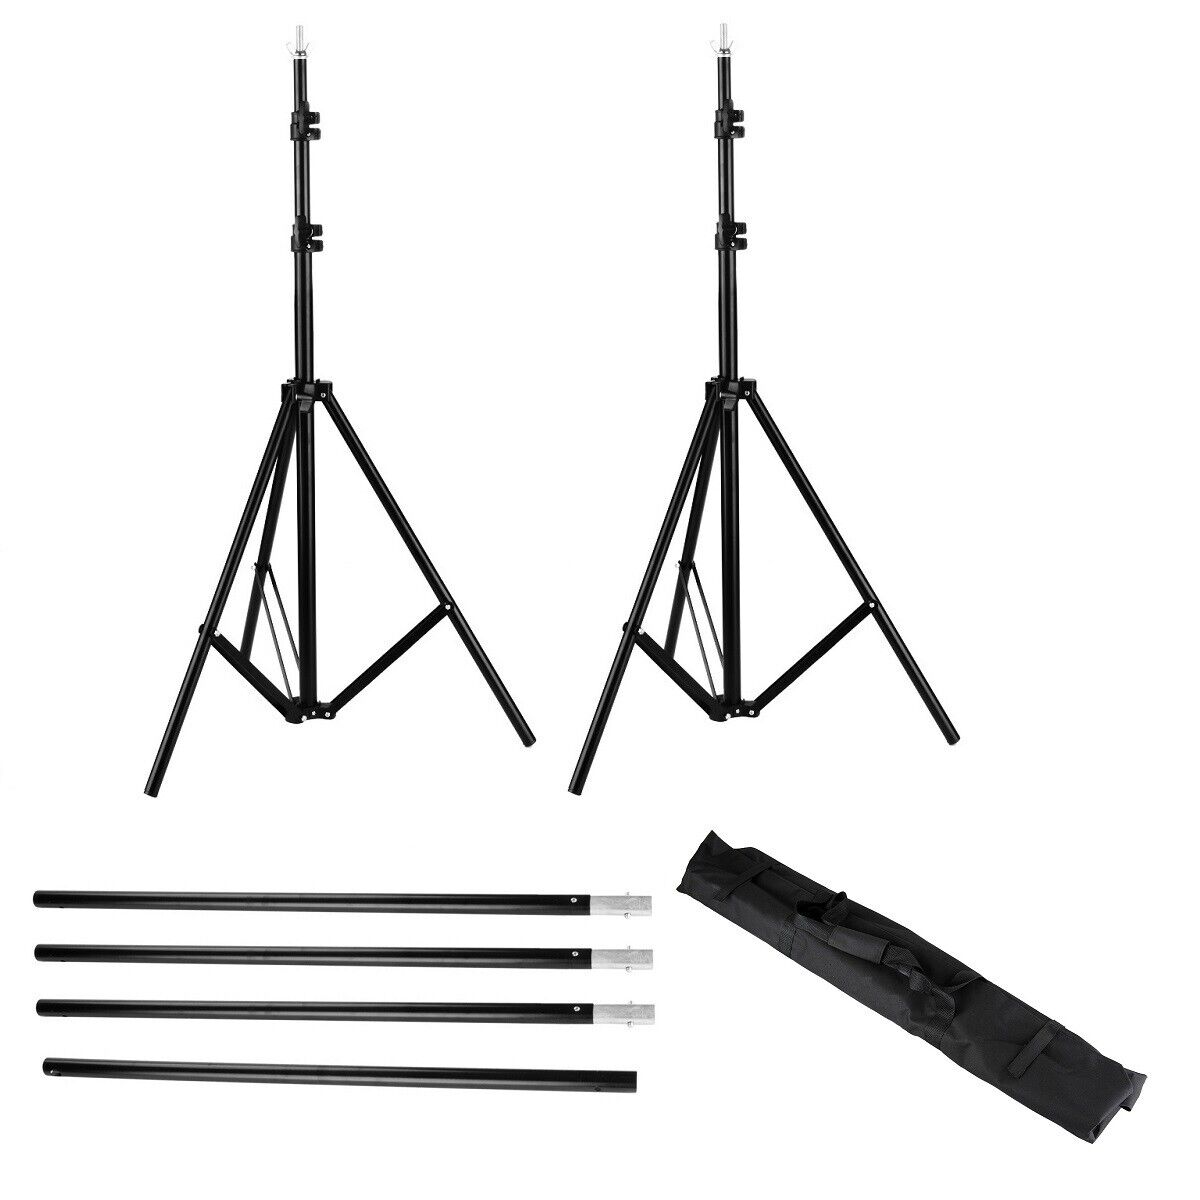 Image 81 - 10ft Heavy Duty Photo Video Studio Backdrop Background Support Stand with Bag